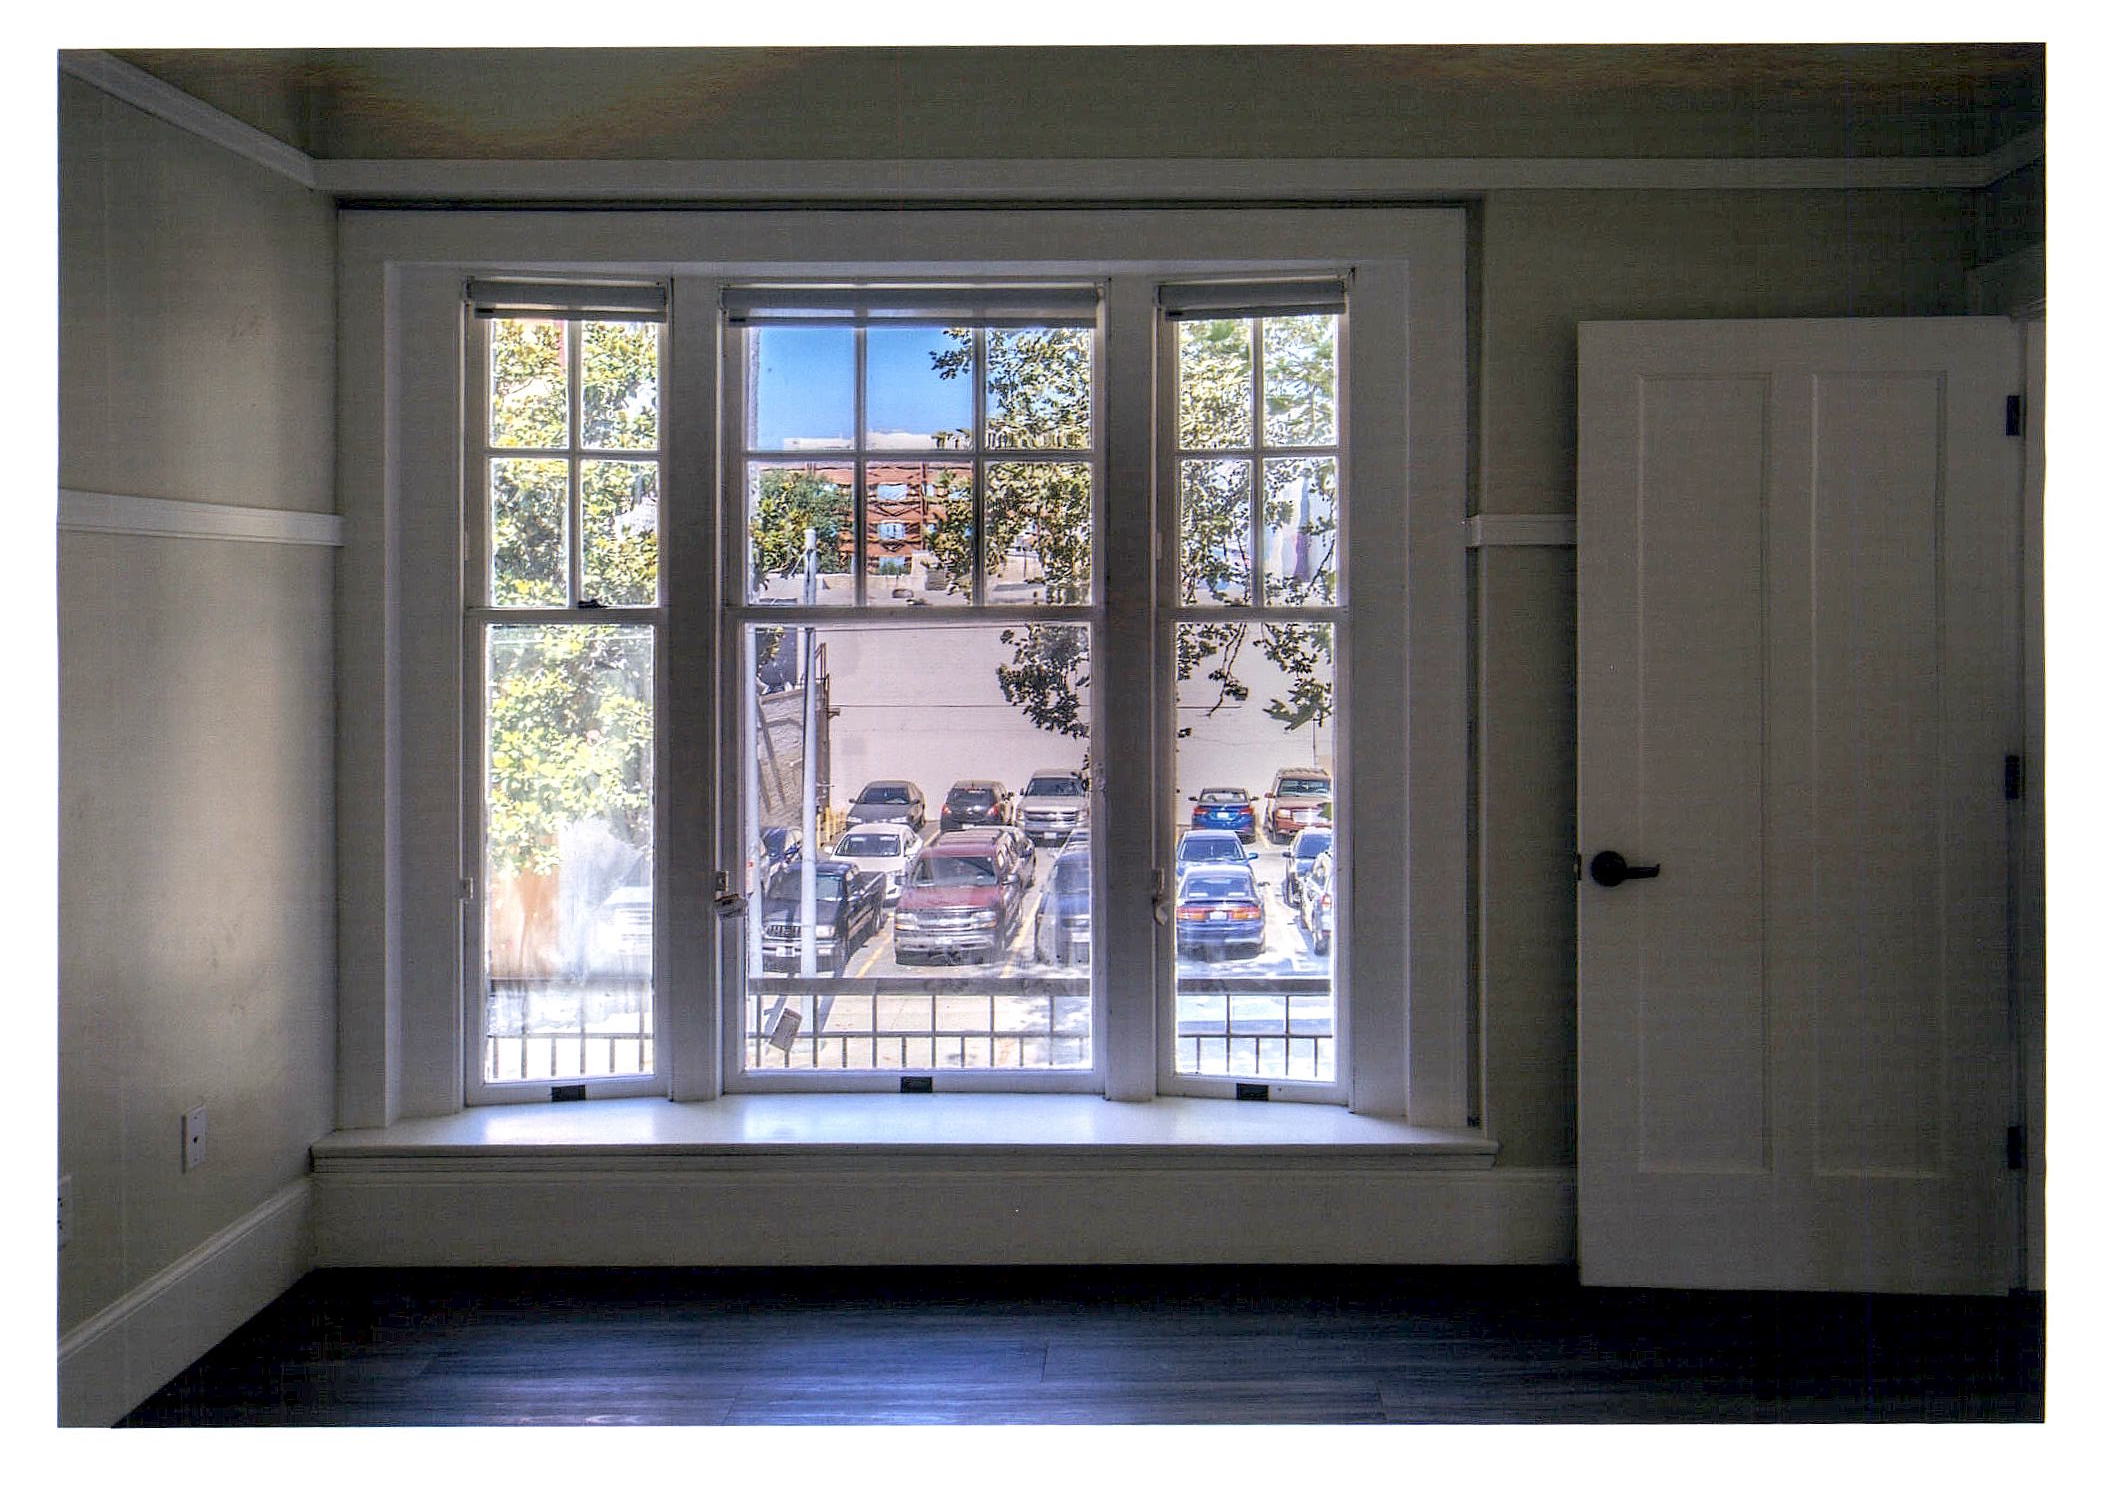 After: interior view of typical restored bay window.